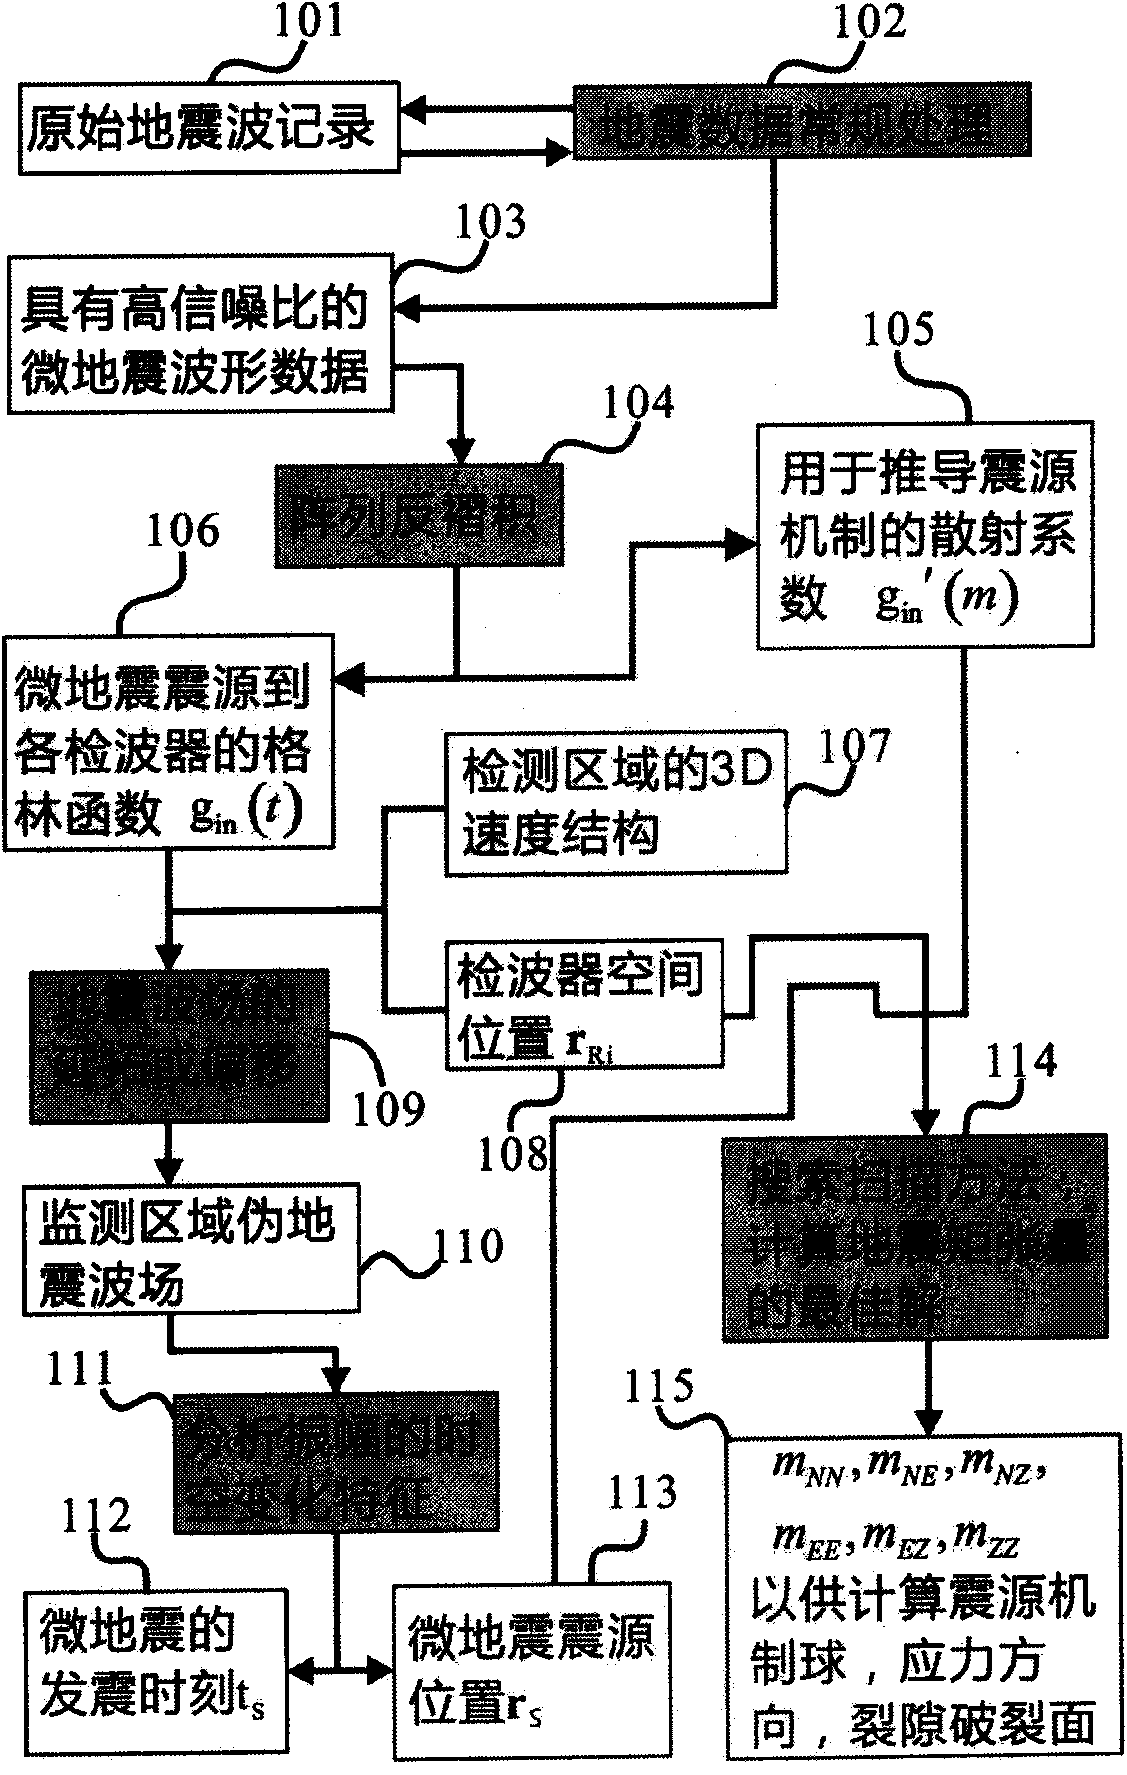 Hydraulic fracturing monitoring method based on array deconvolution treatment